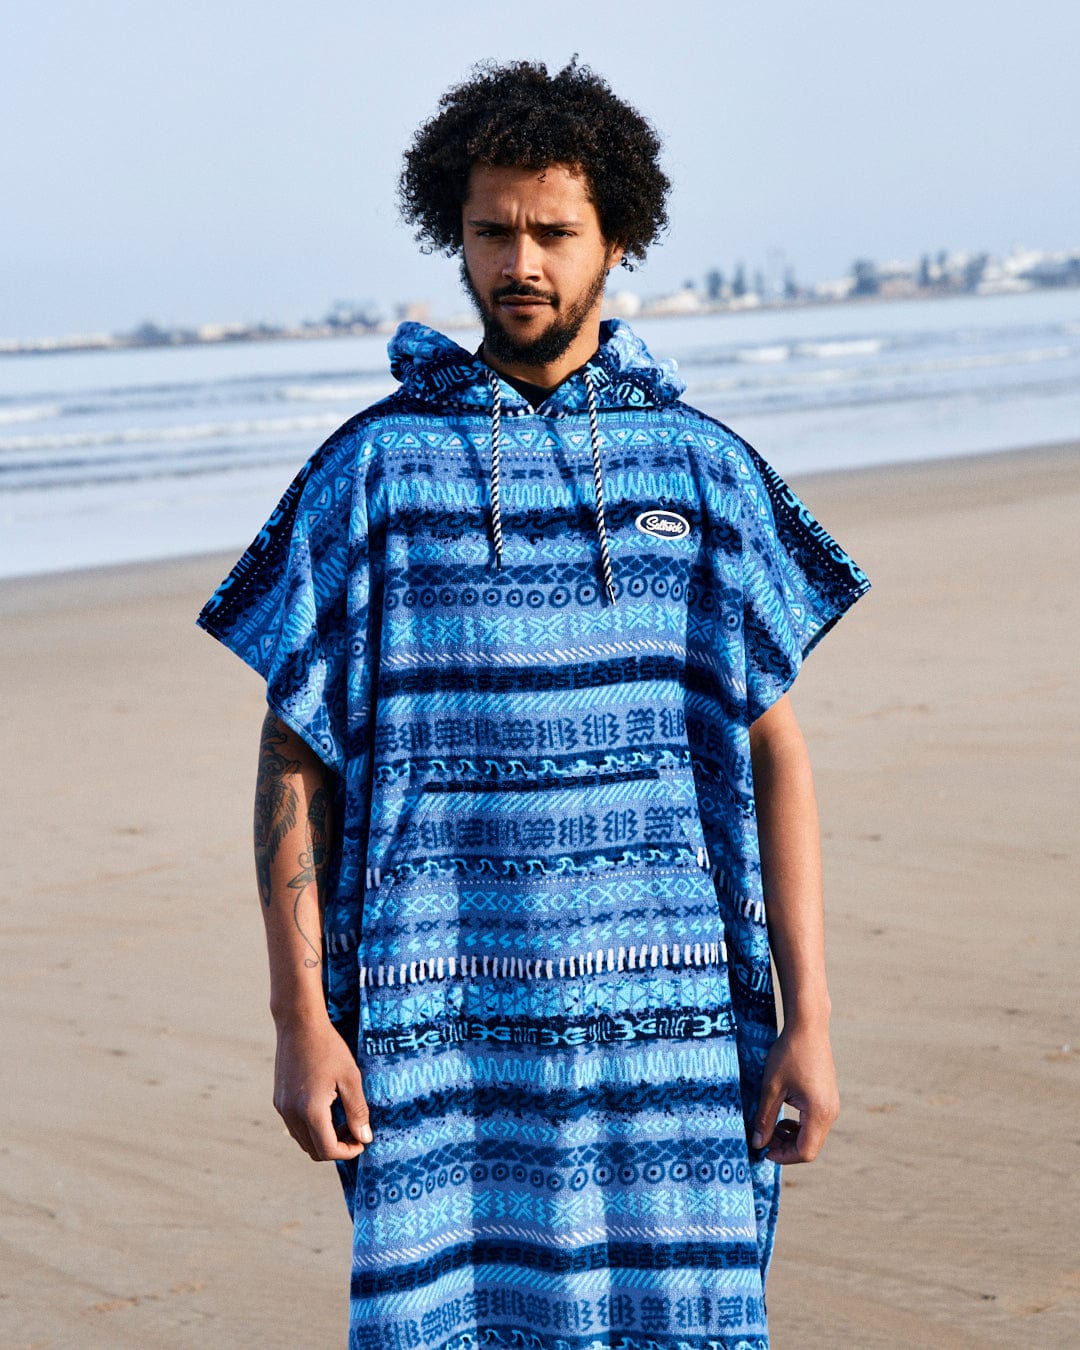 Man with curly hair wearing a Saltrock Changing Towel in Blue with a vintage stripe pattern, standing on a beach with the ocean in the background.